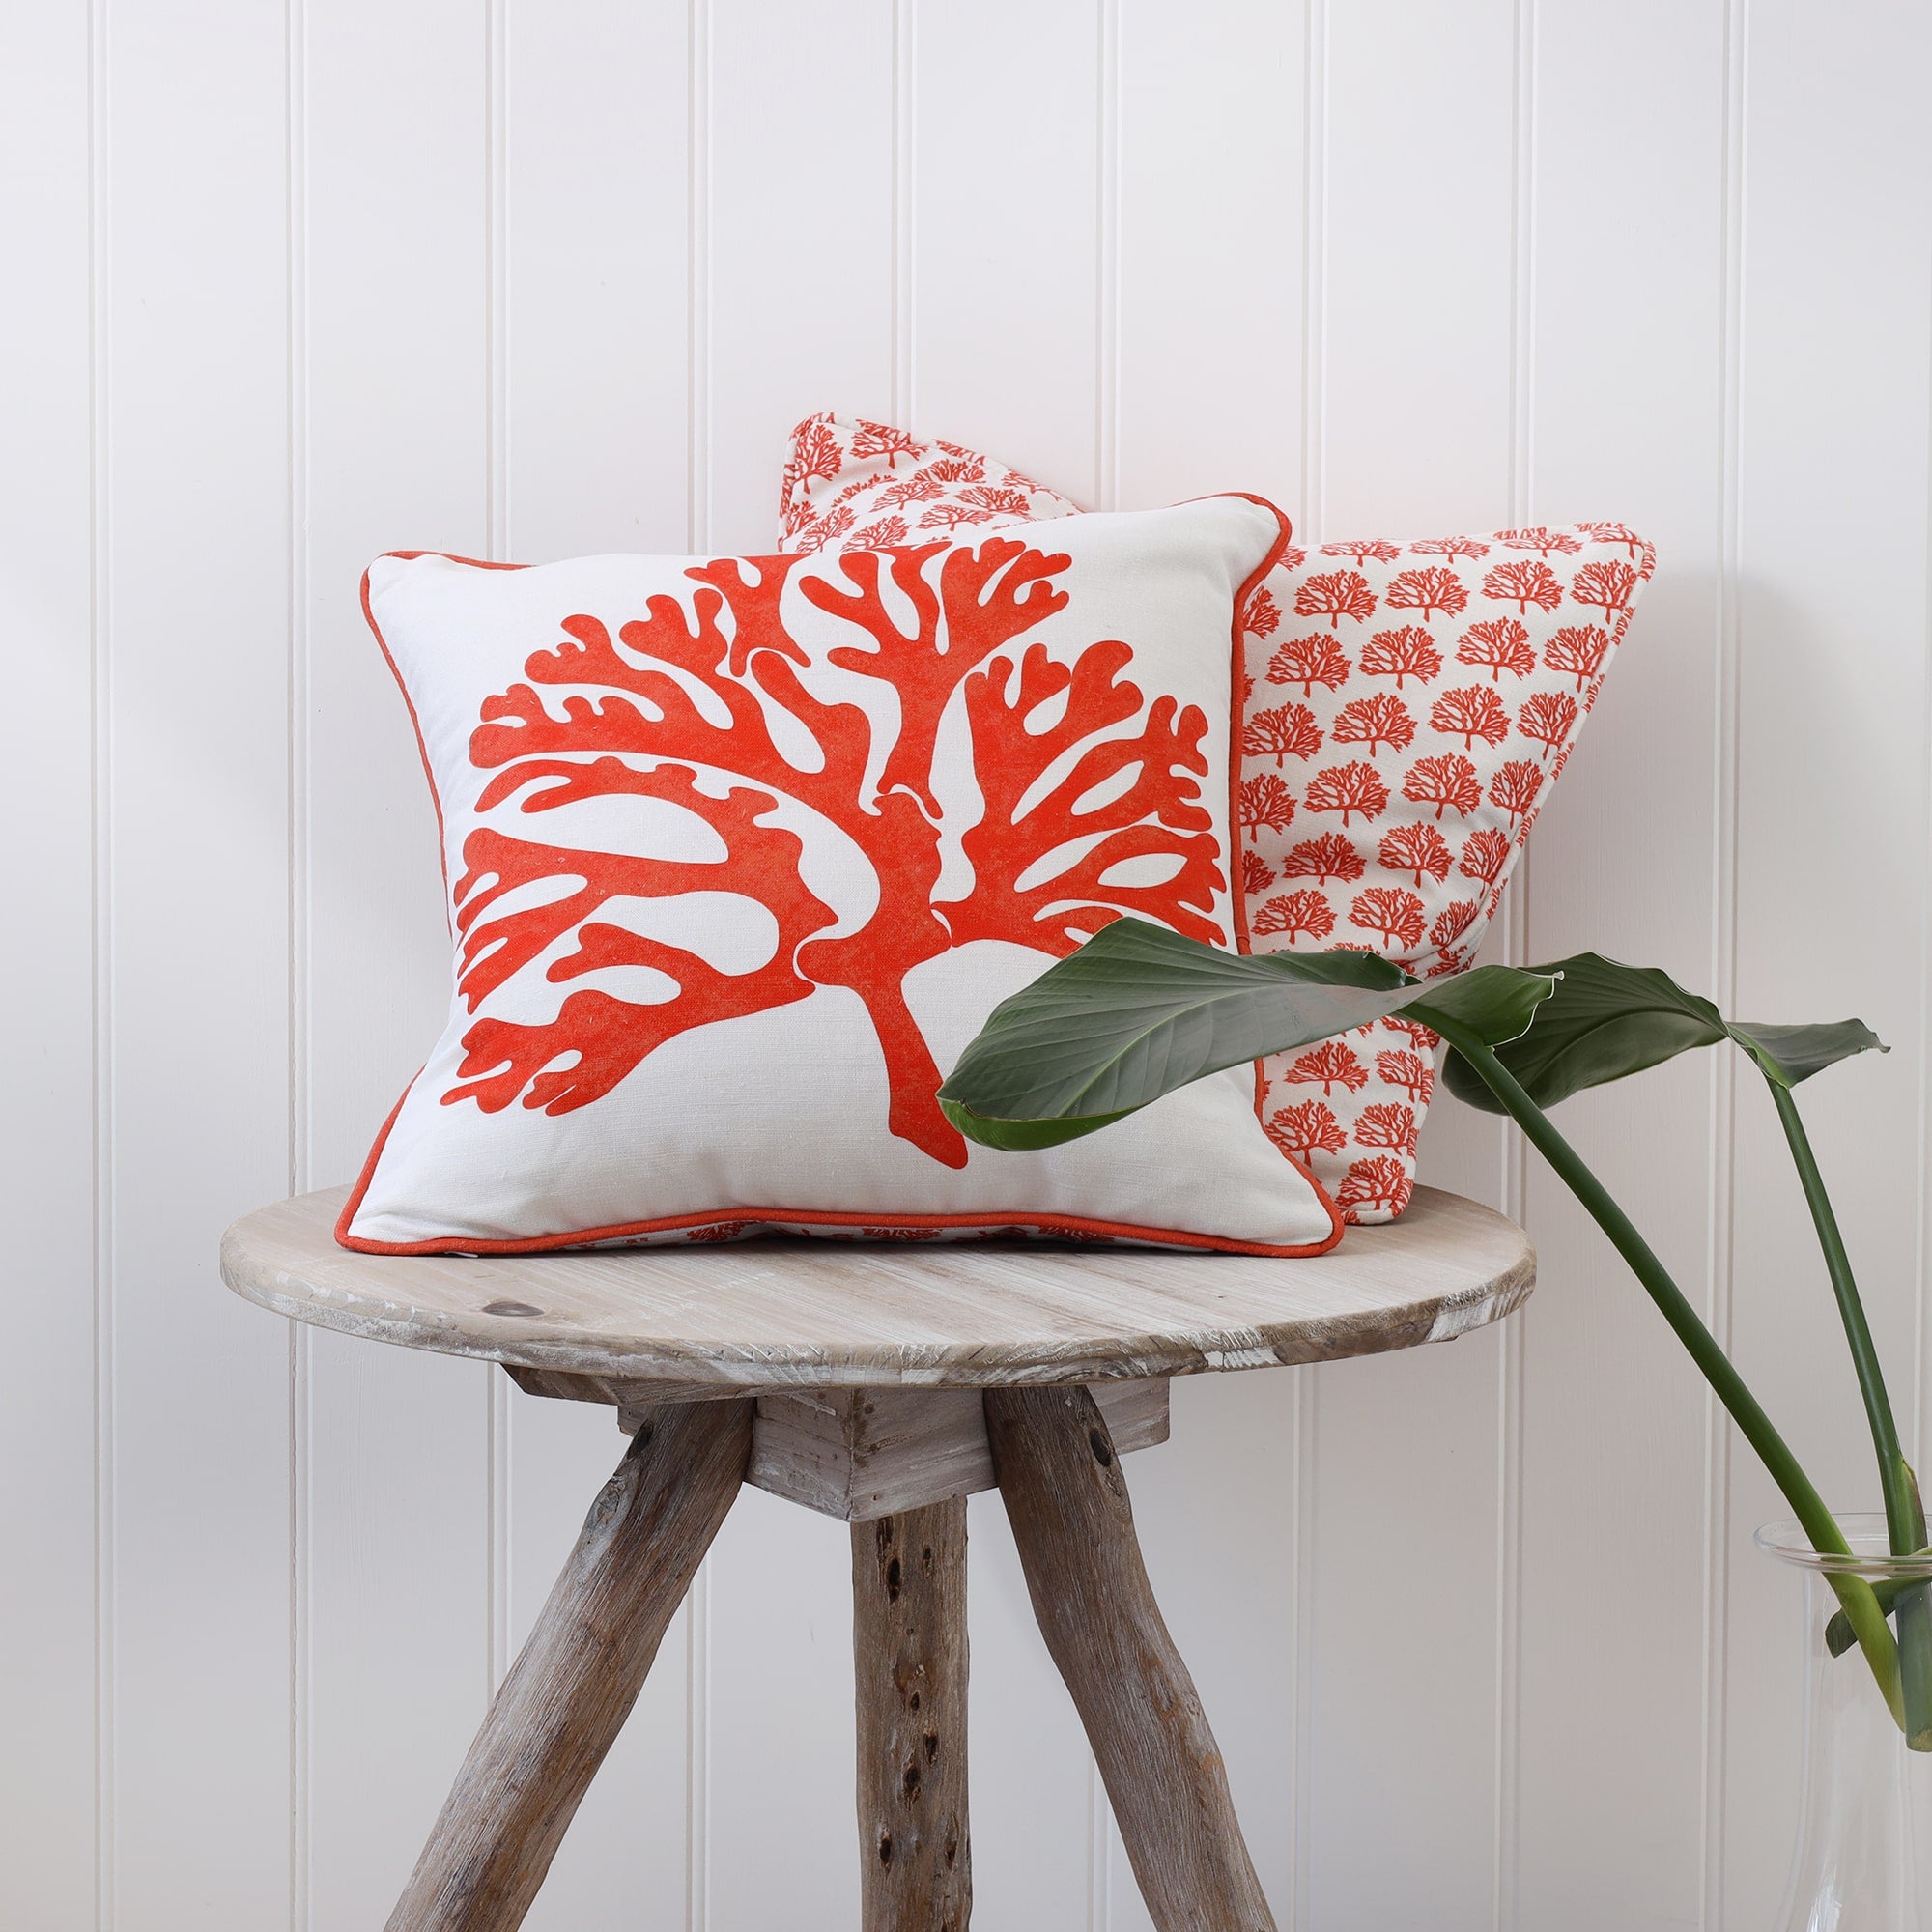 Orange mini coral cushion behind a cushion with a larger print on the front,both are placed on a tripod table.